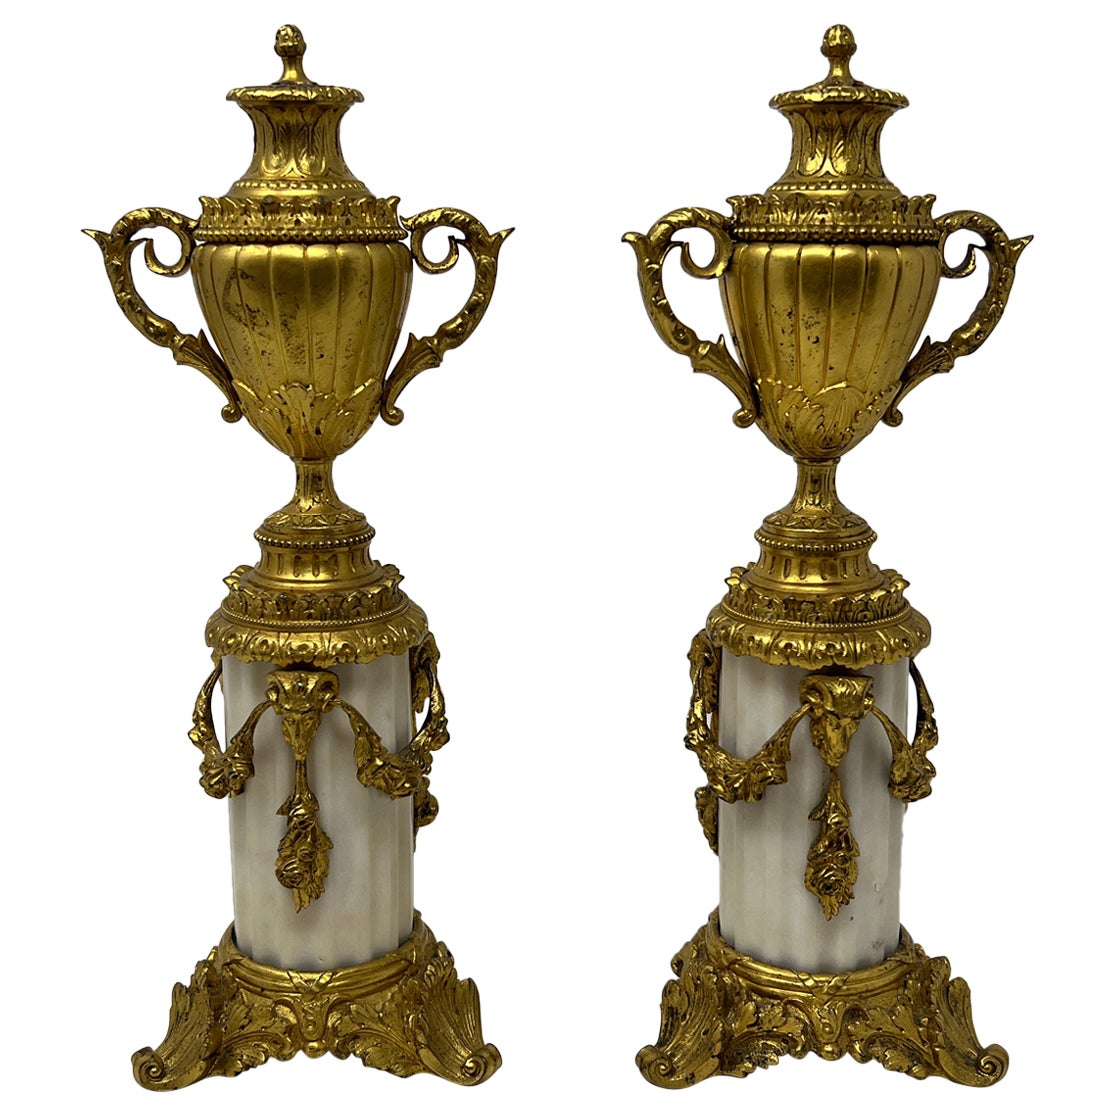 Pair of Antique French Marble and Ormolu Candlesticks